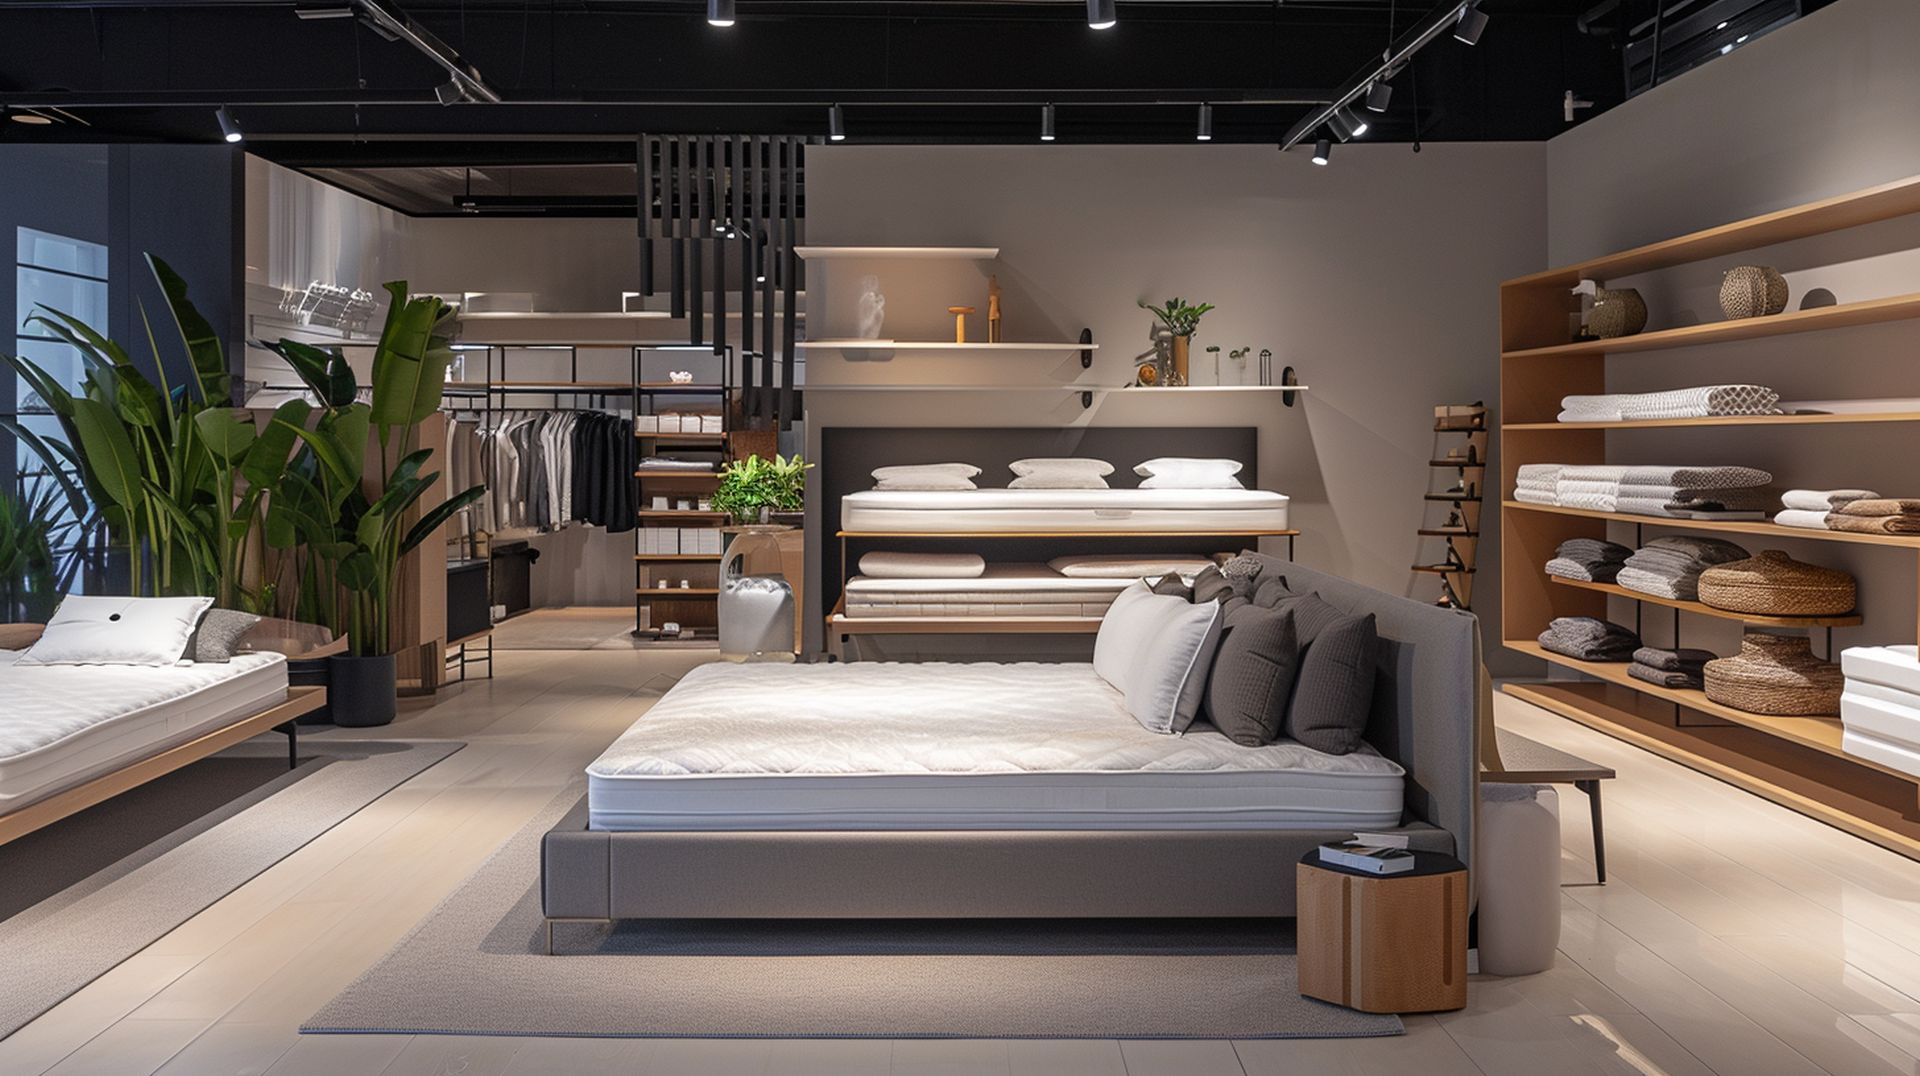 If you're looking for a new bed, mattress stores in Santa Monica offer the best customer and delivery service, financing, and warranties in California